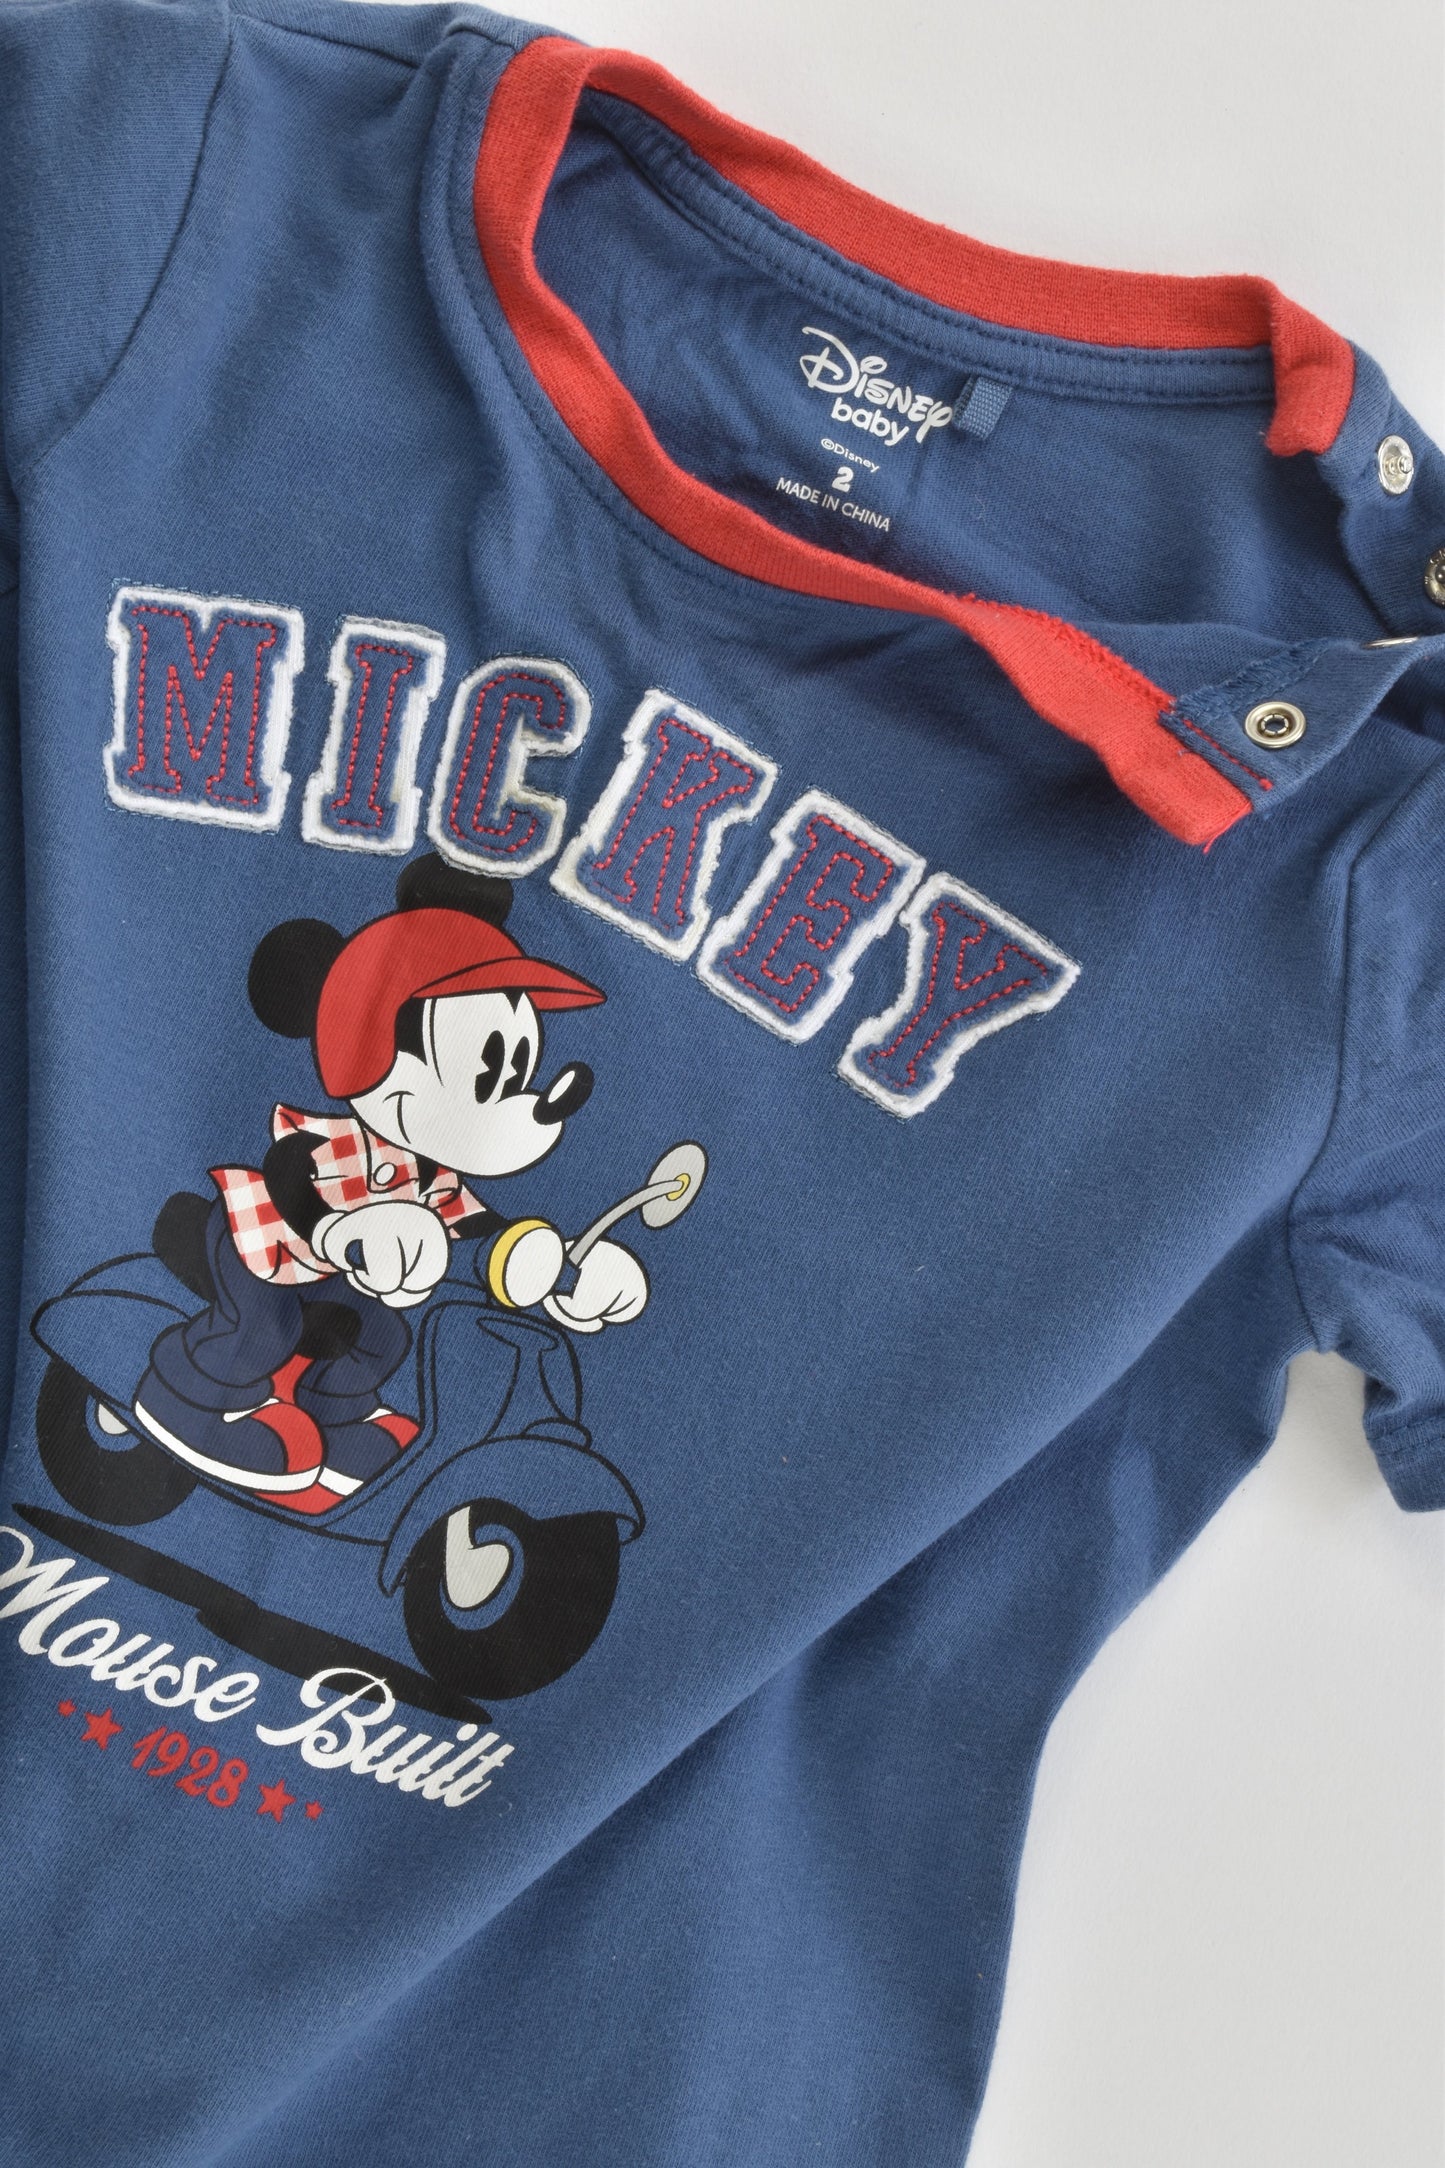 Disney Baby (Target) Size 2 (18-24 months) Mickey Mouse T-Shirt